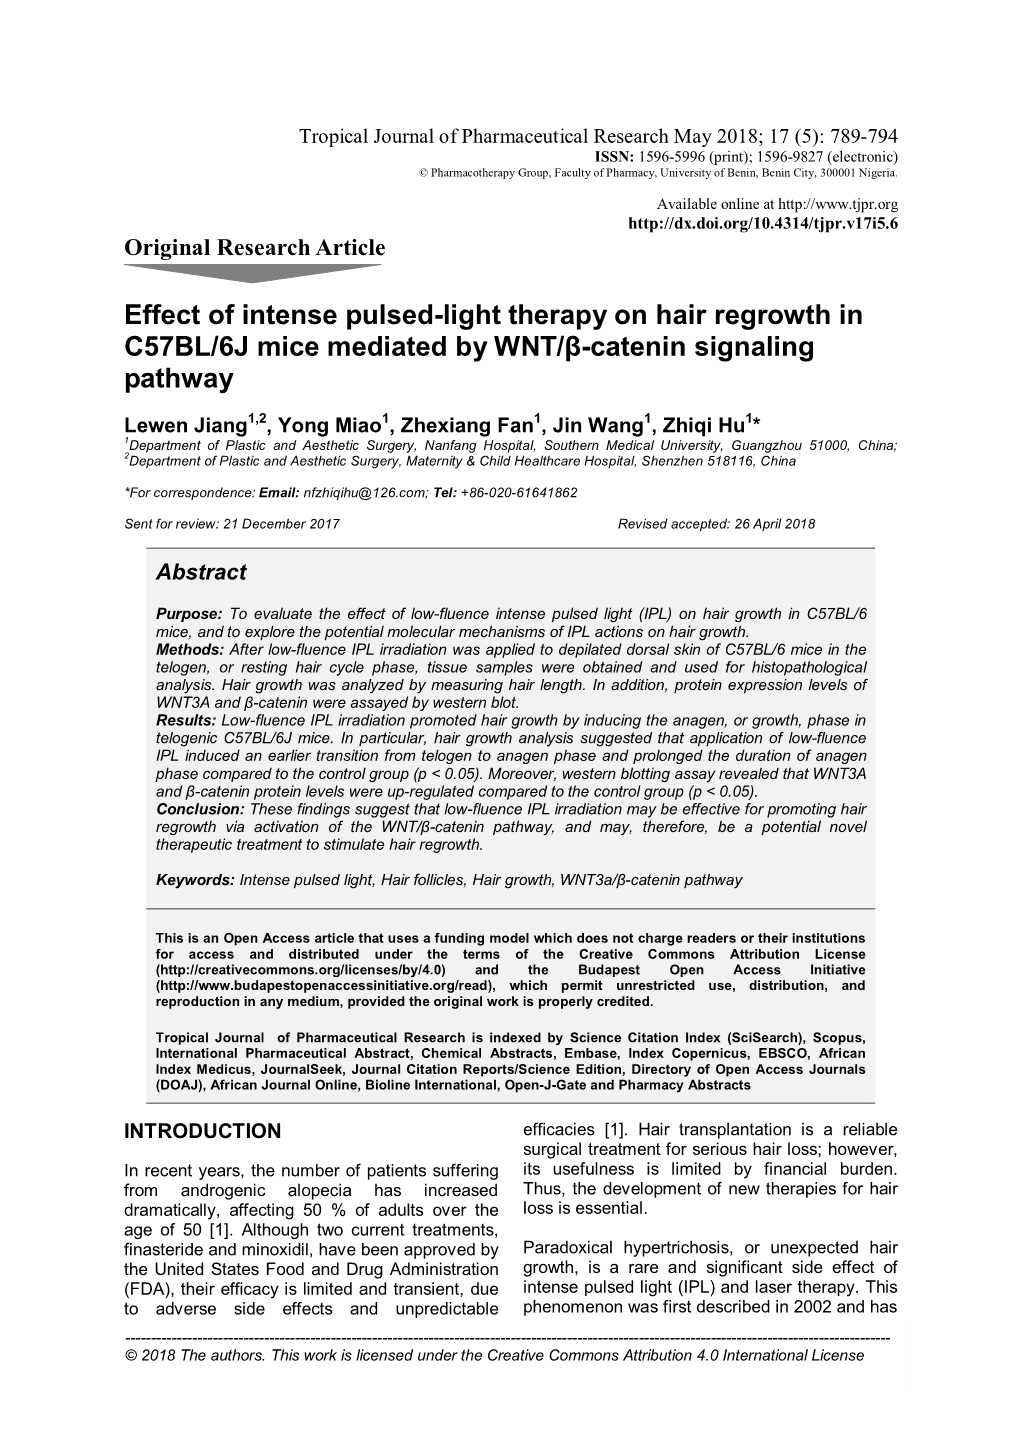 Effect of Intense Pulsed-Light Therapy on Hair Regrowth in C57BL/6J Mice Mediated by WNT/Β-Catenin Signaling Pathway